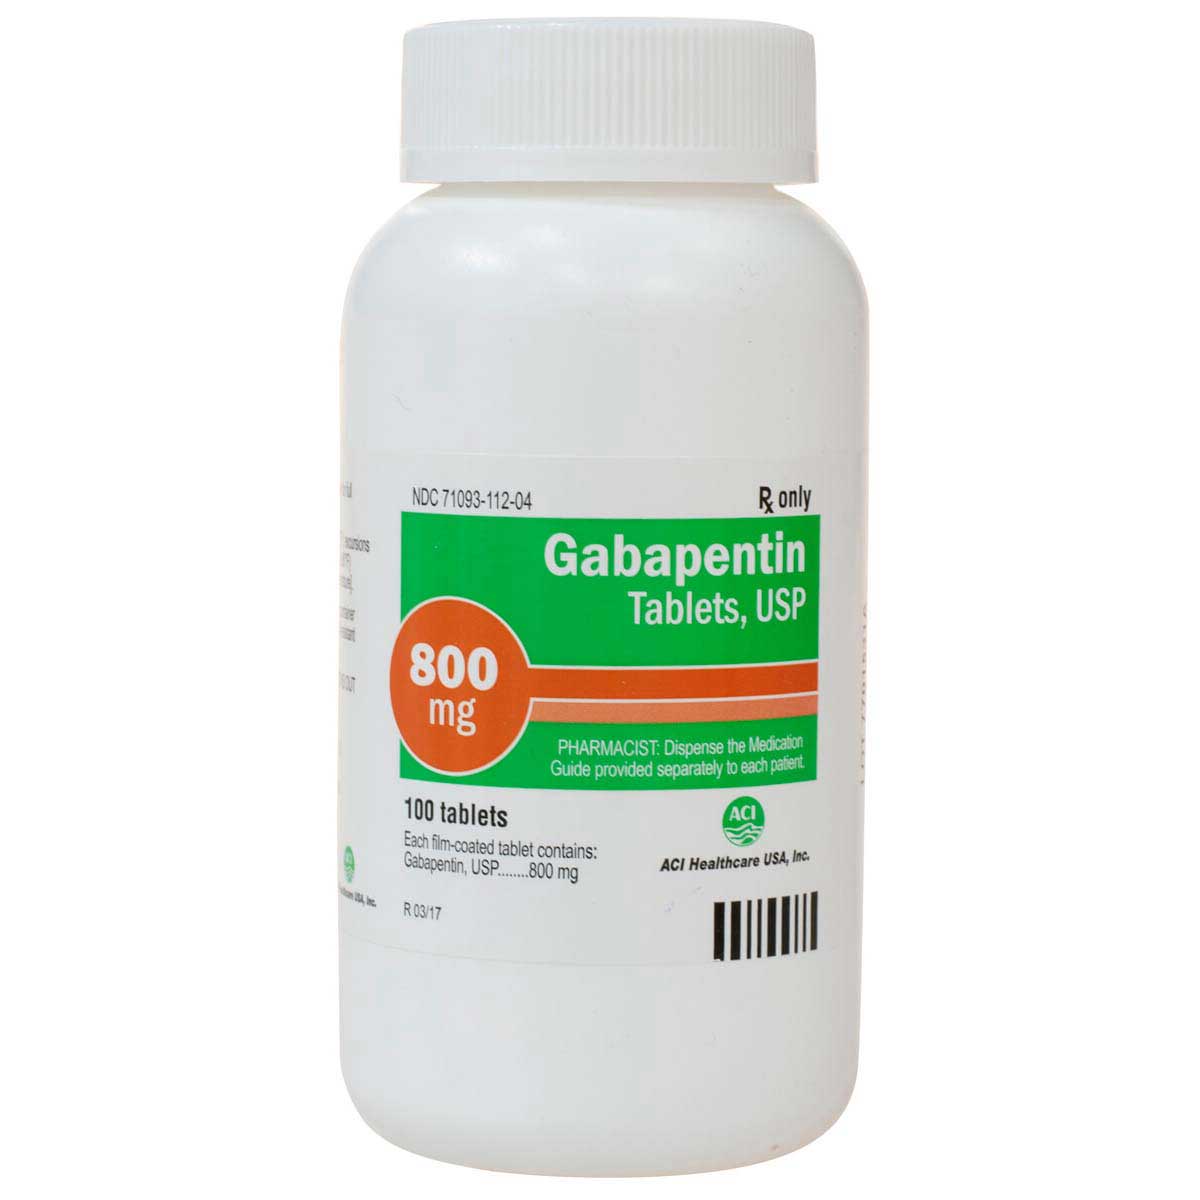 gabapentin pica in cats